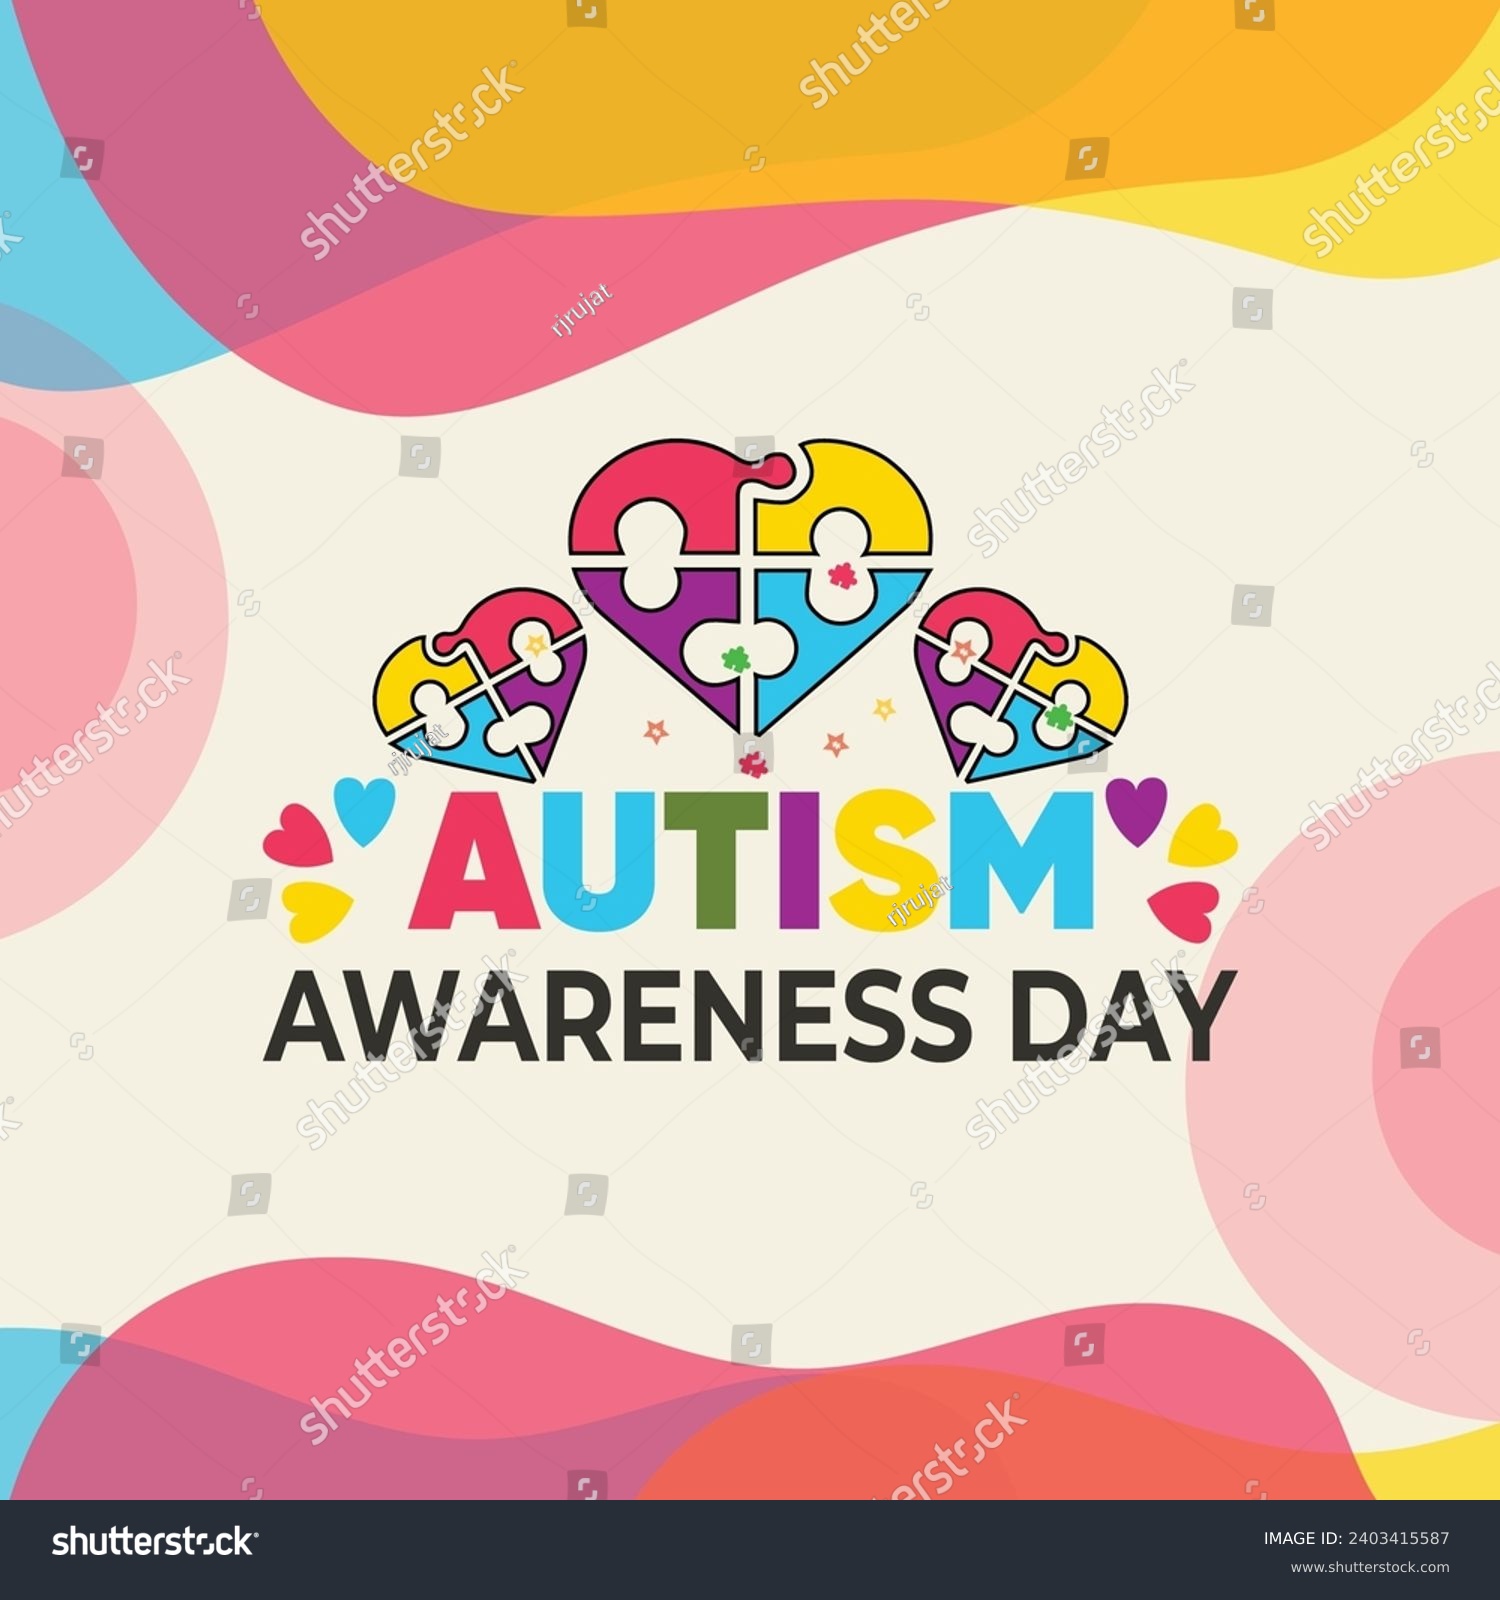 SVG of Autism awareness day background design template. Cover design for book, greeting card, banner, poster, invitation. svg